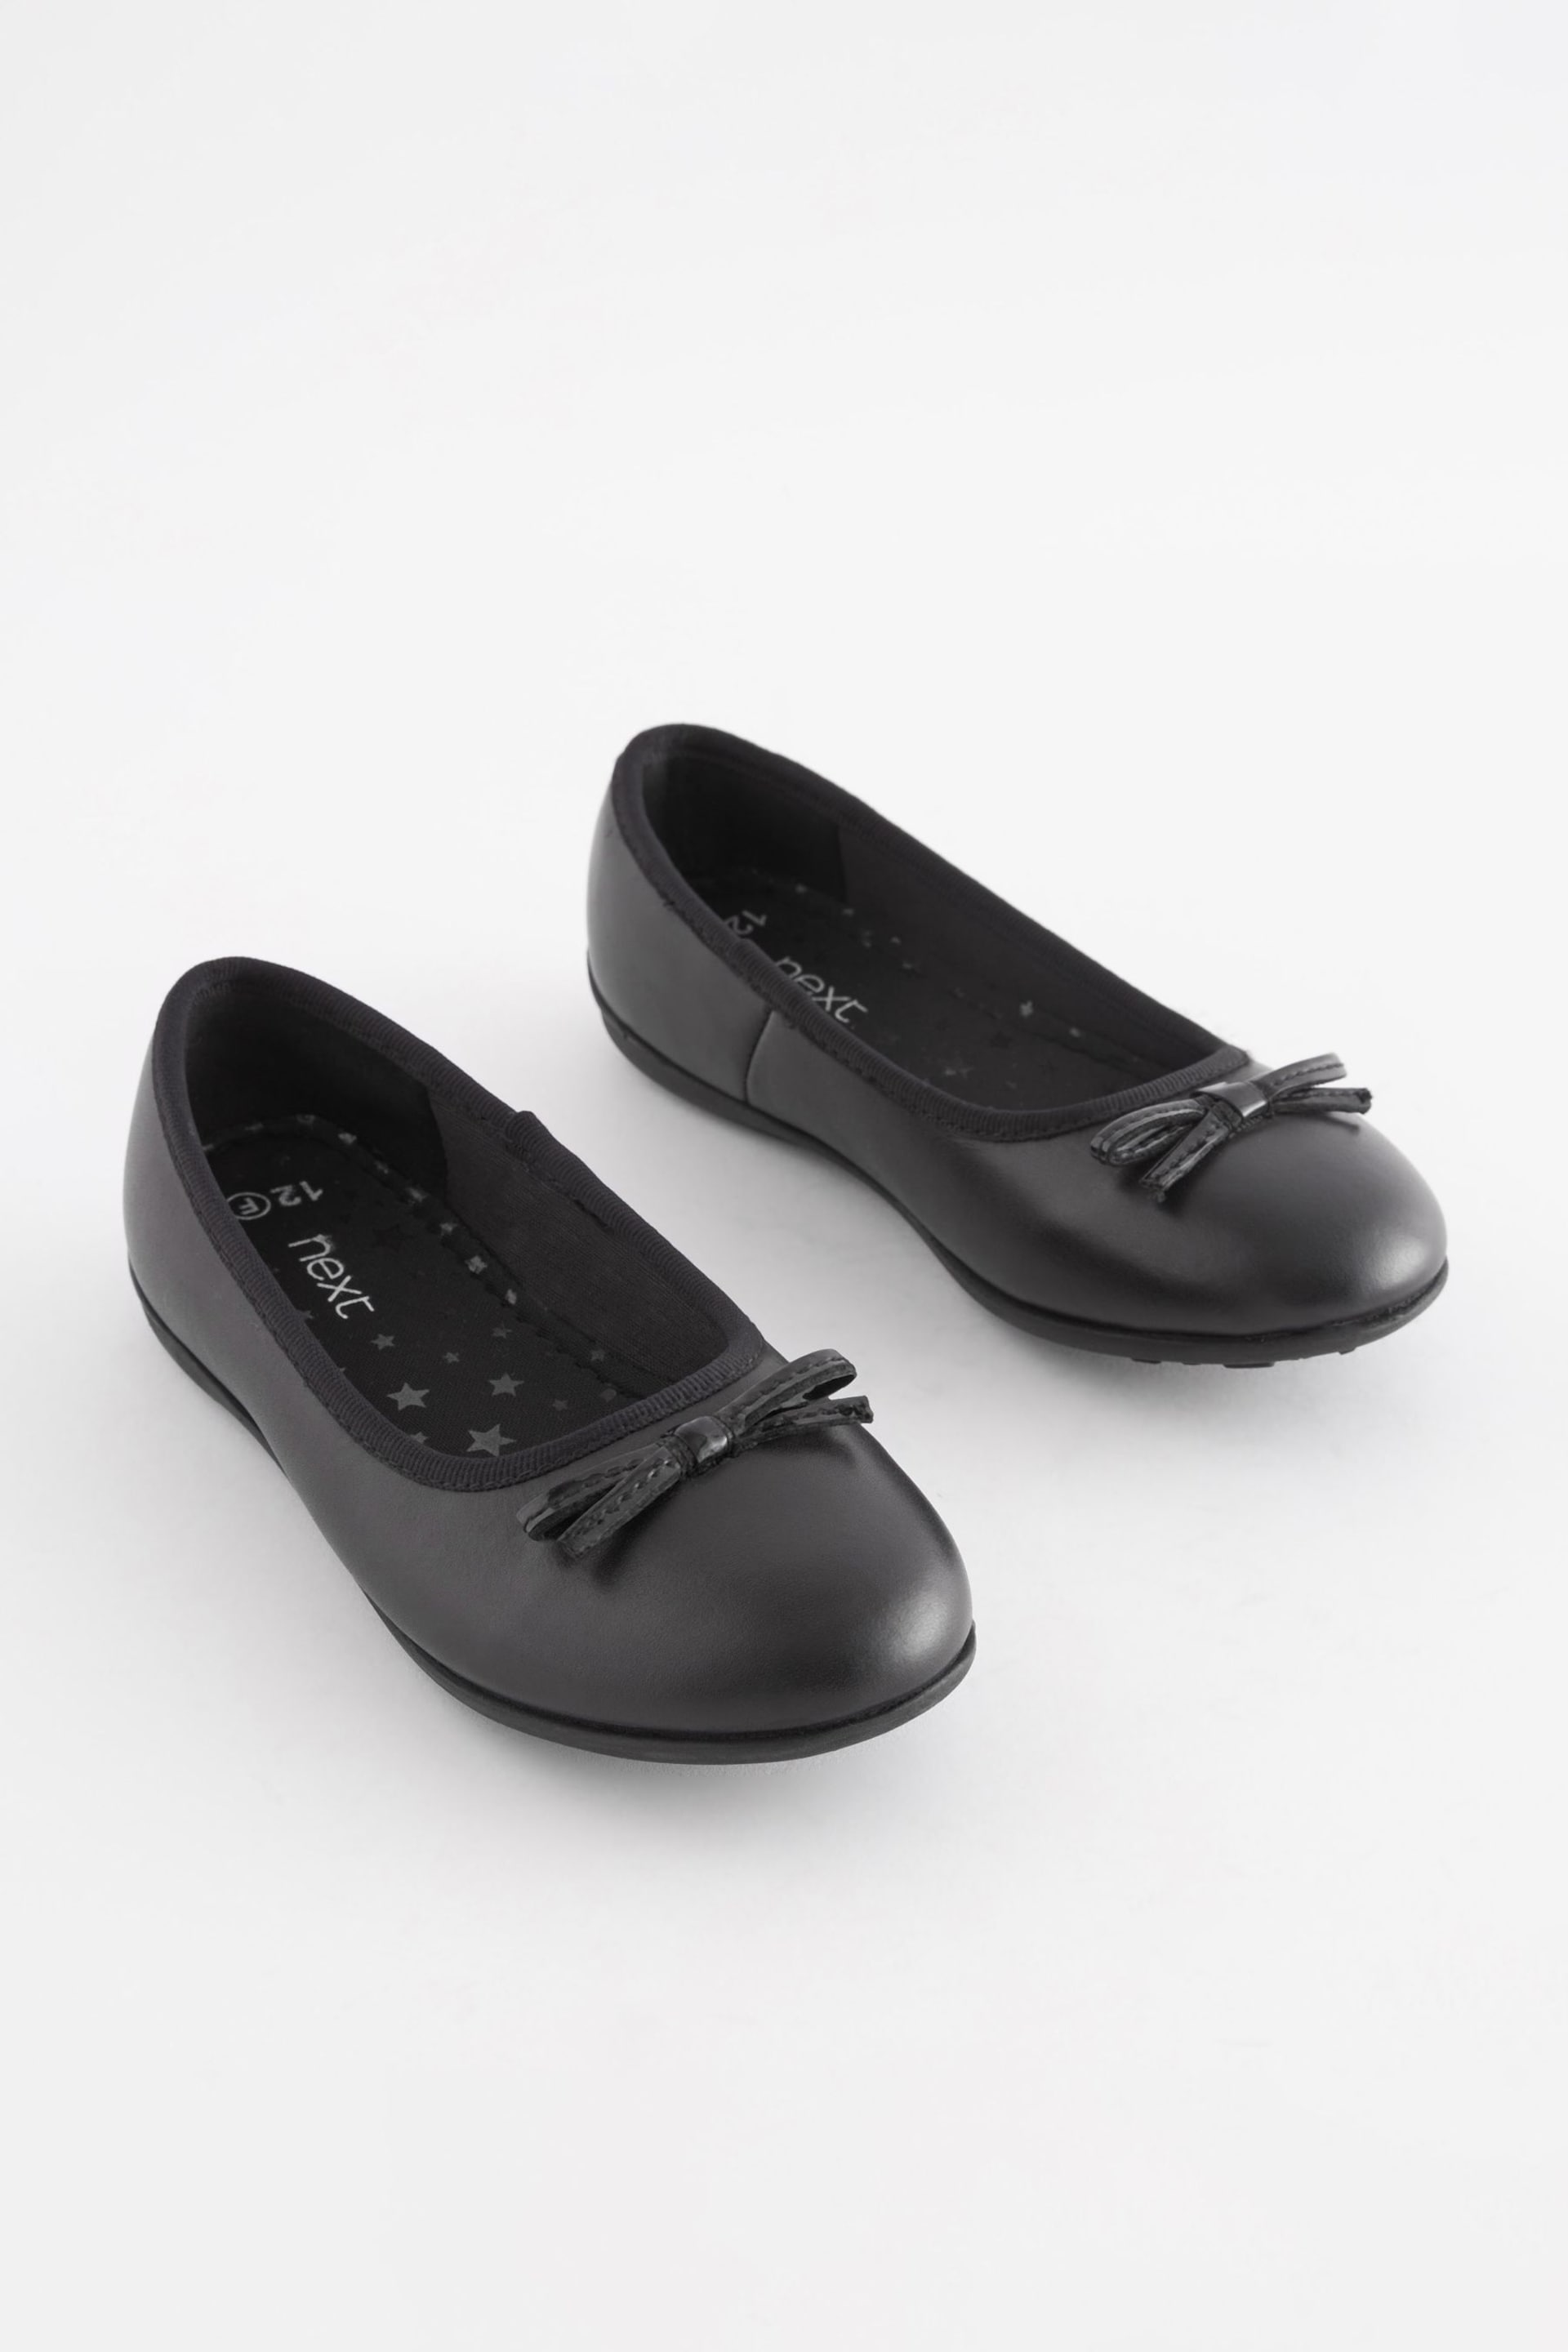 Black Wide Fit (G) School Leather Ballet Shoes - Image 1 of 5